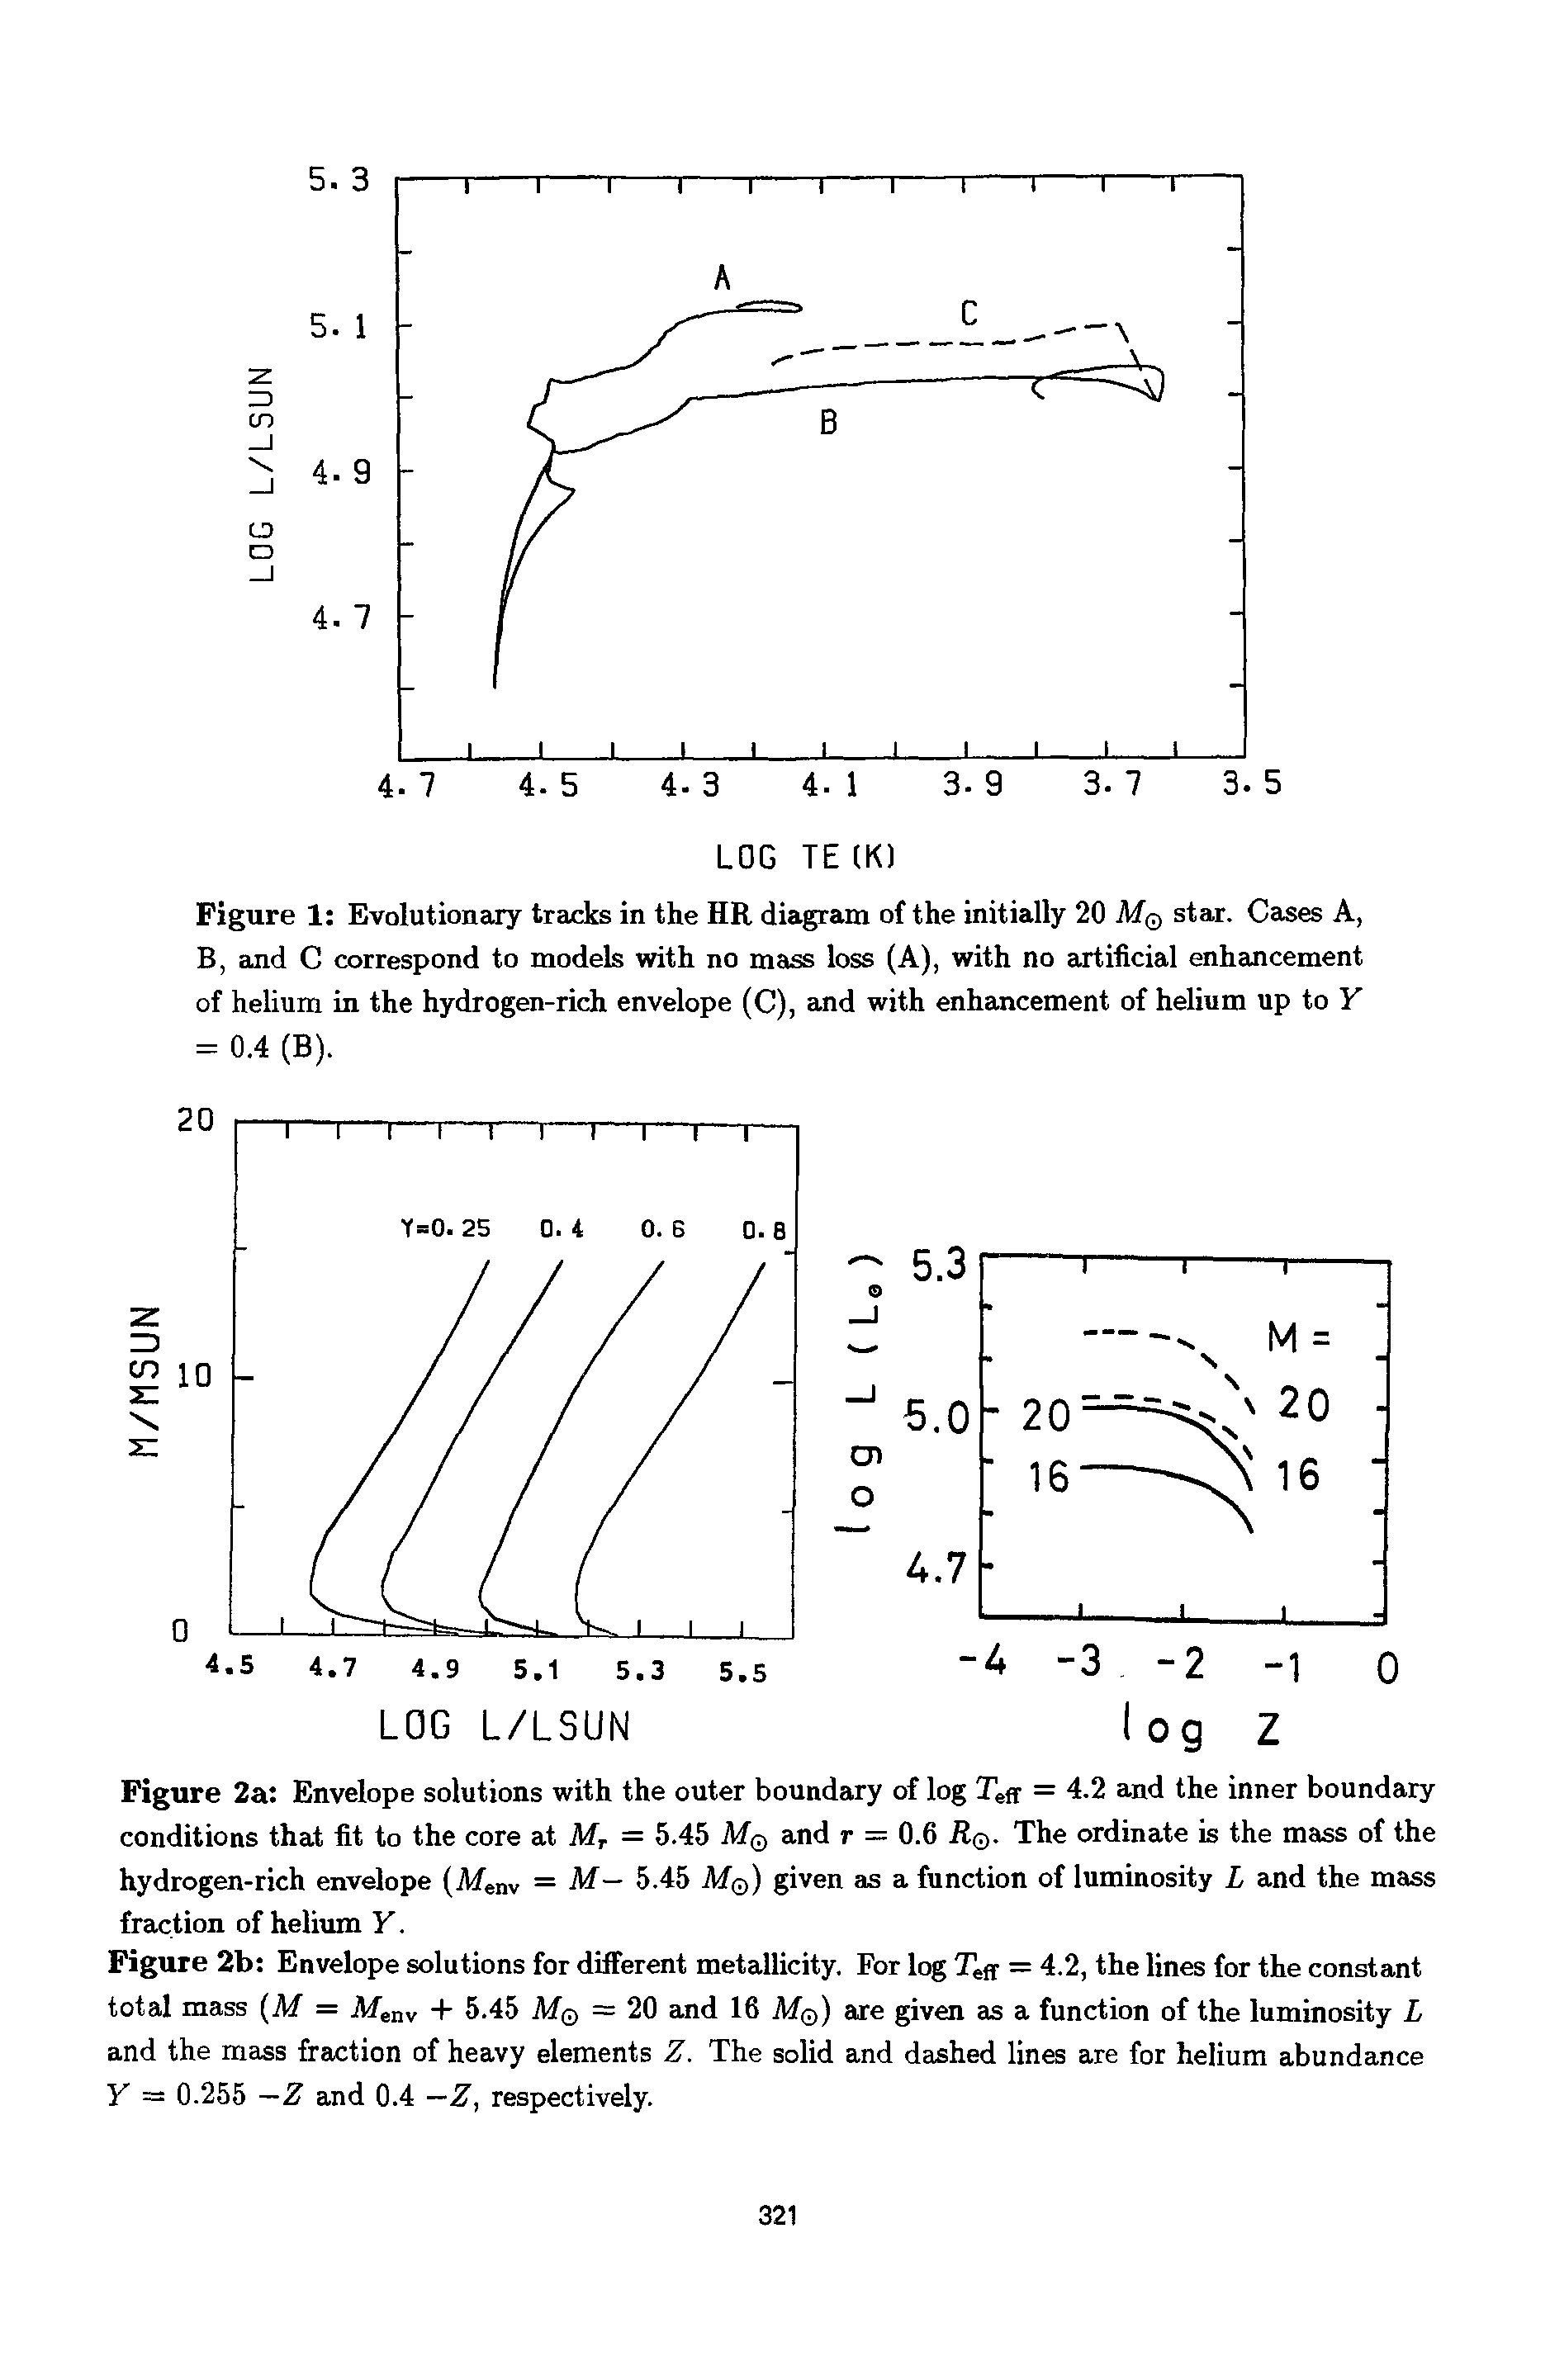 Figure 2a Envelope solutions with the outer boundary of log Tefr = 4.2 and the inner boundary conditions that fit to the core at Mr = 5.45 M and r = 0.6 Rq. The ordinate is the mass of the hydrogen-rich envelope (Menv = M— 5.45 M ) given as a function of luminosity L and the mass fraction of helium Y.